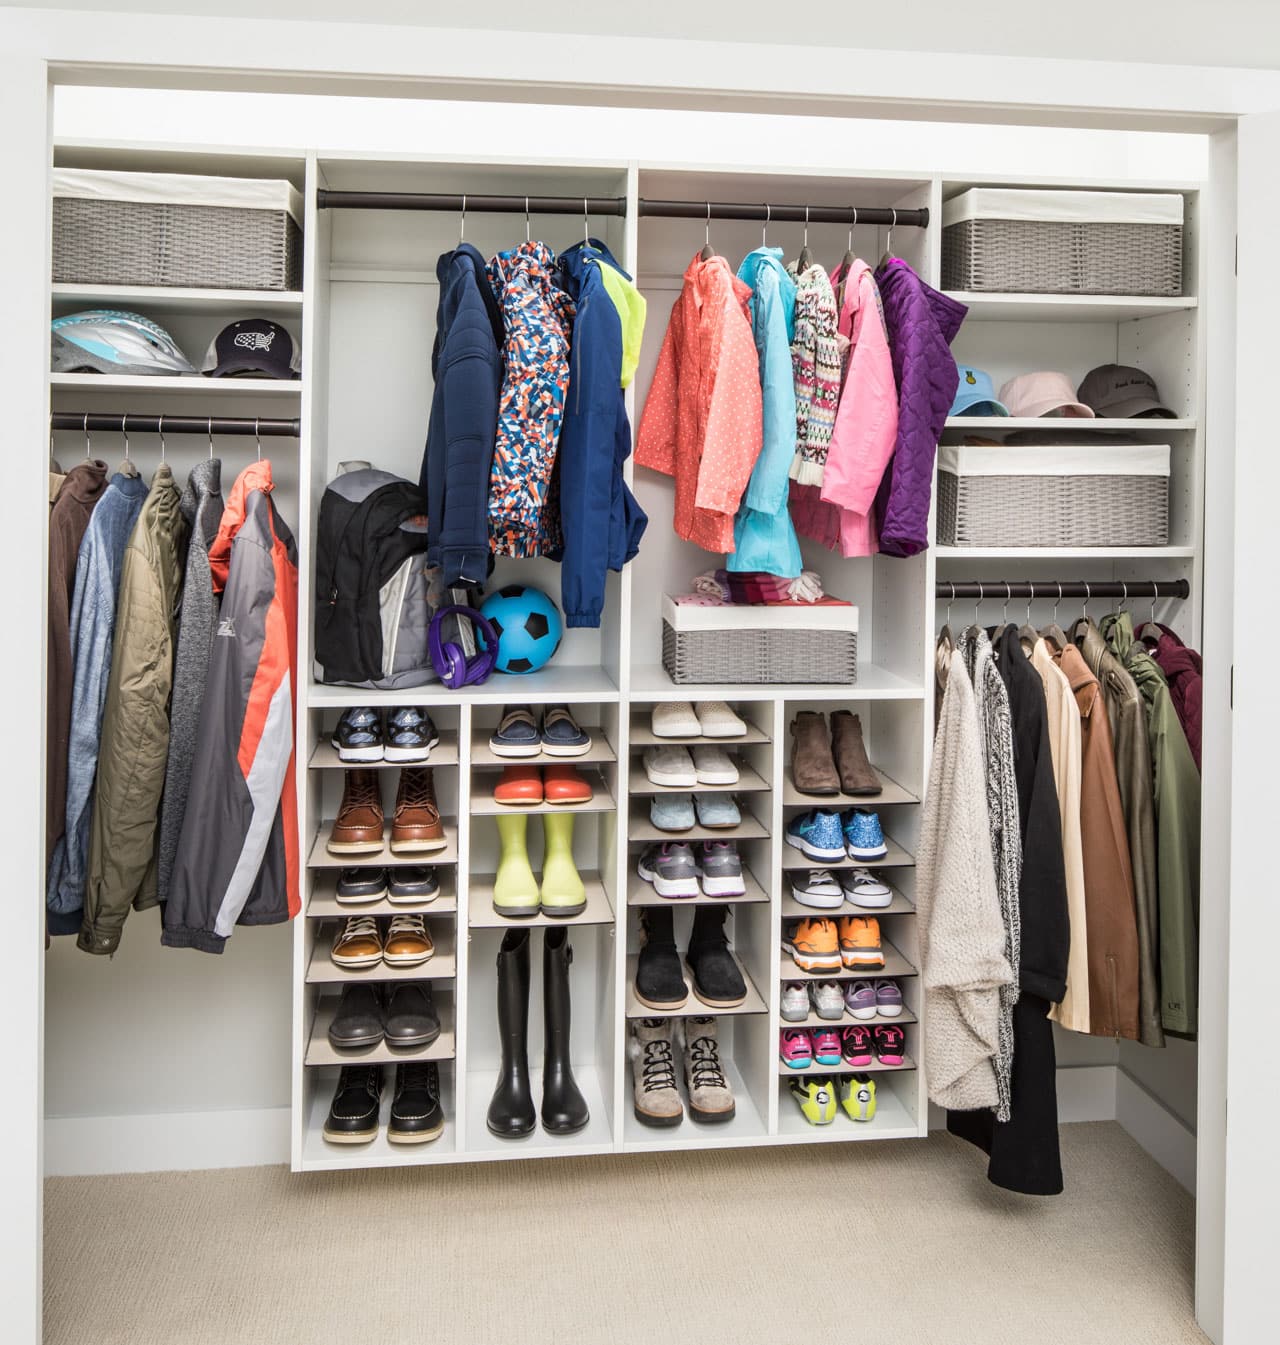 Closet filled with shoes, coats and other accessories